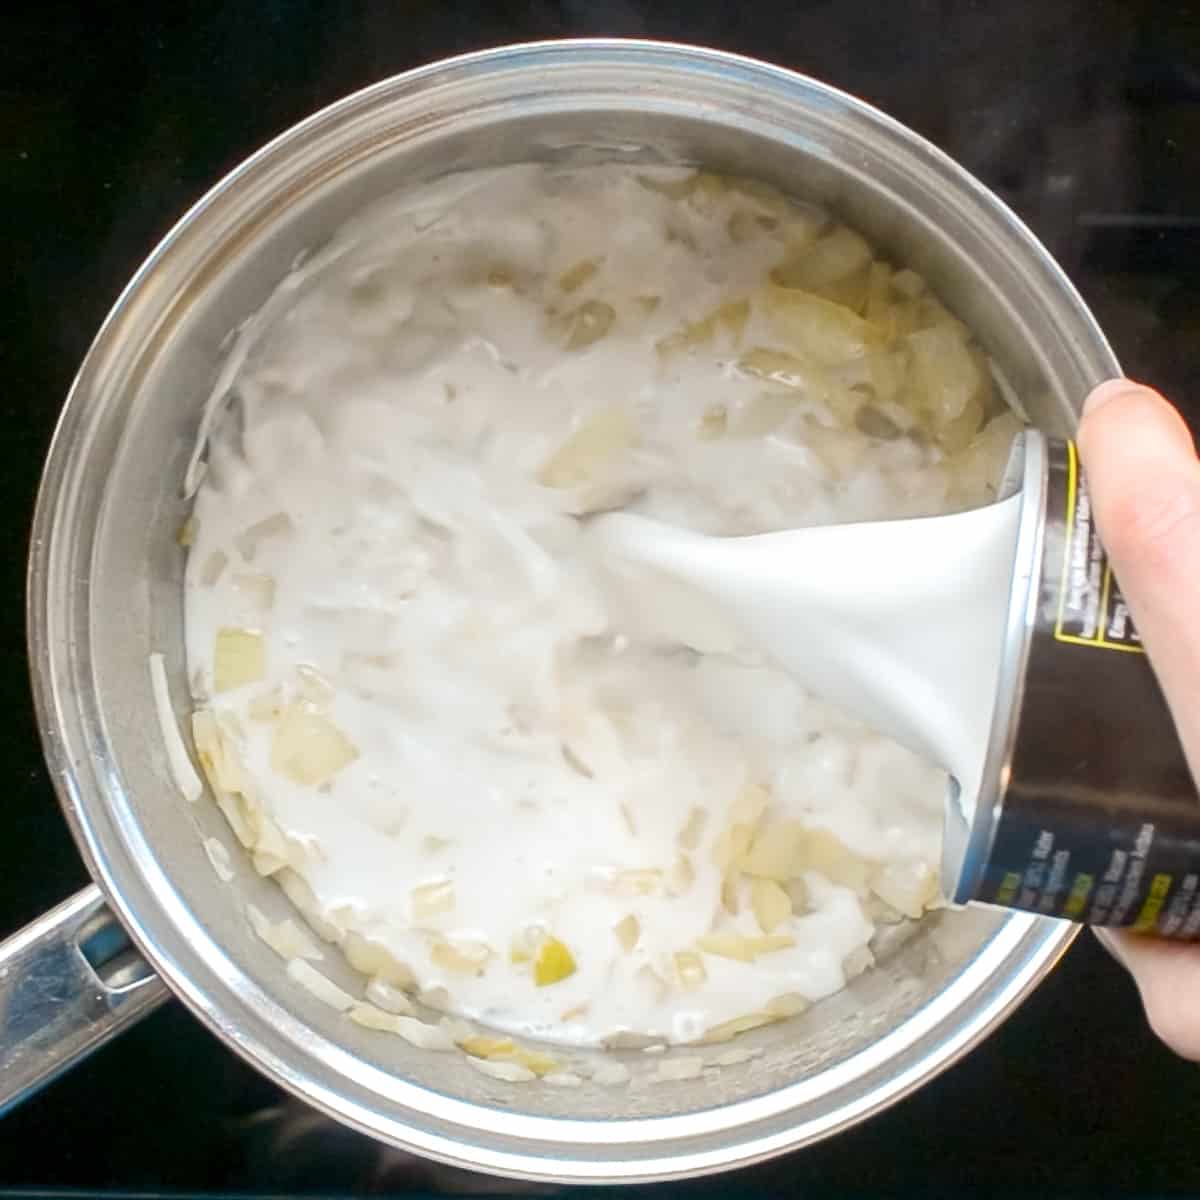 Coconut milk is poured from a can into the saucepan with sauteed onions.